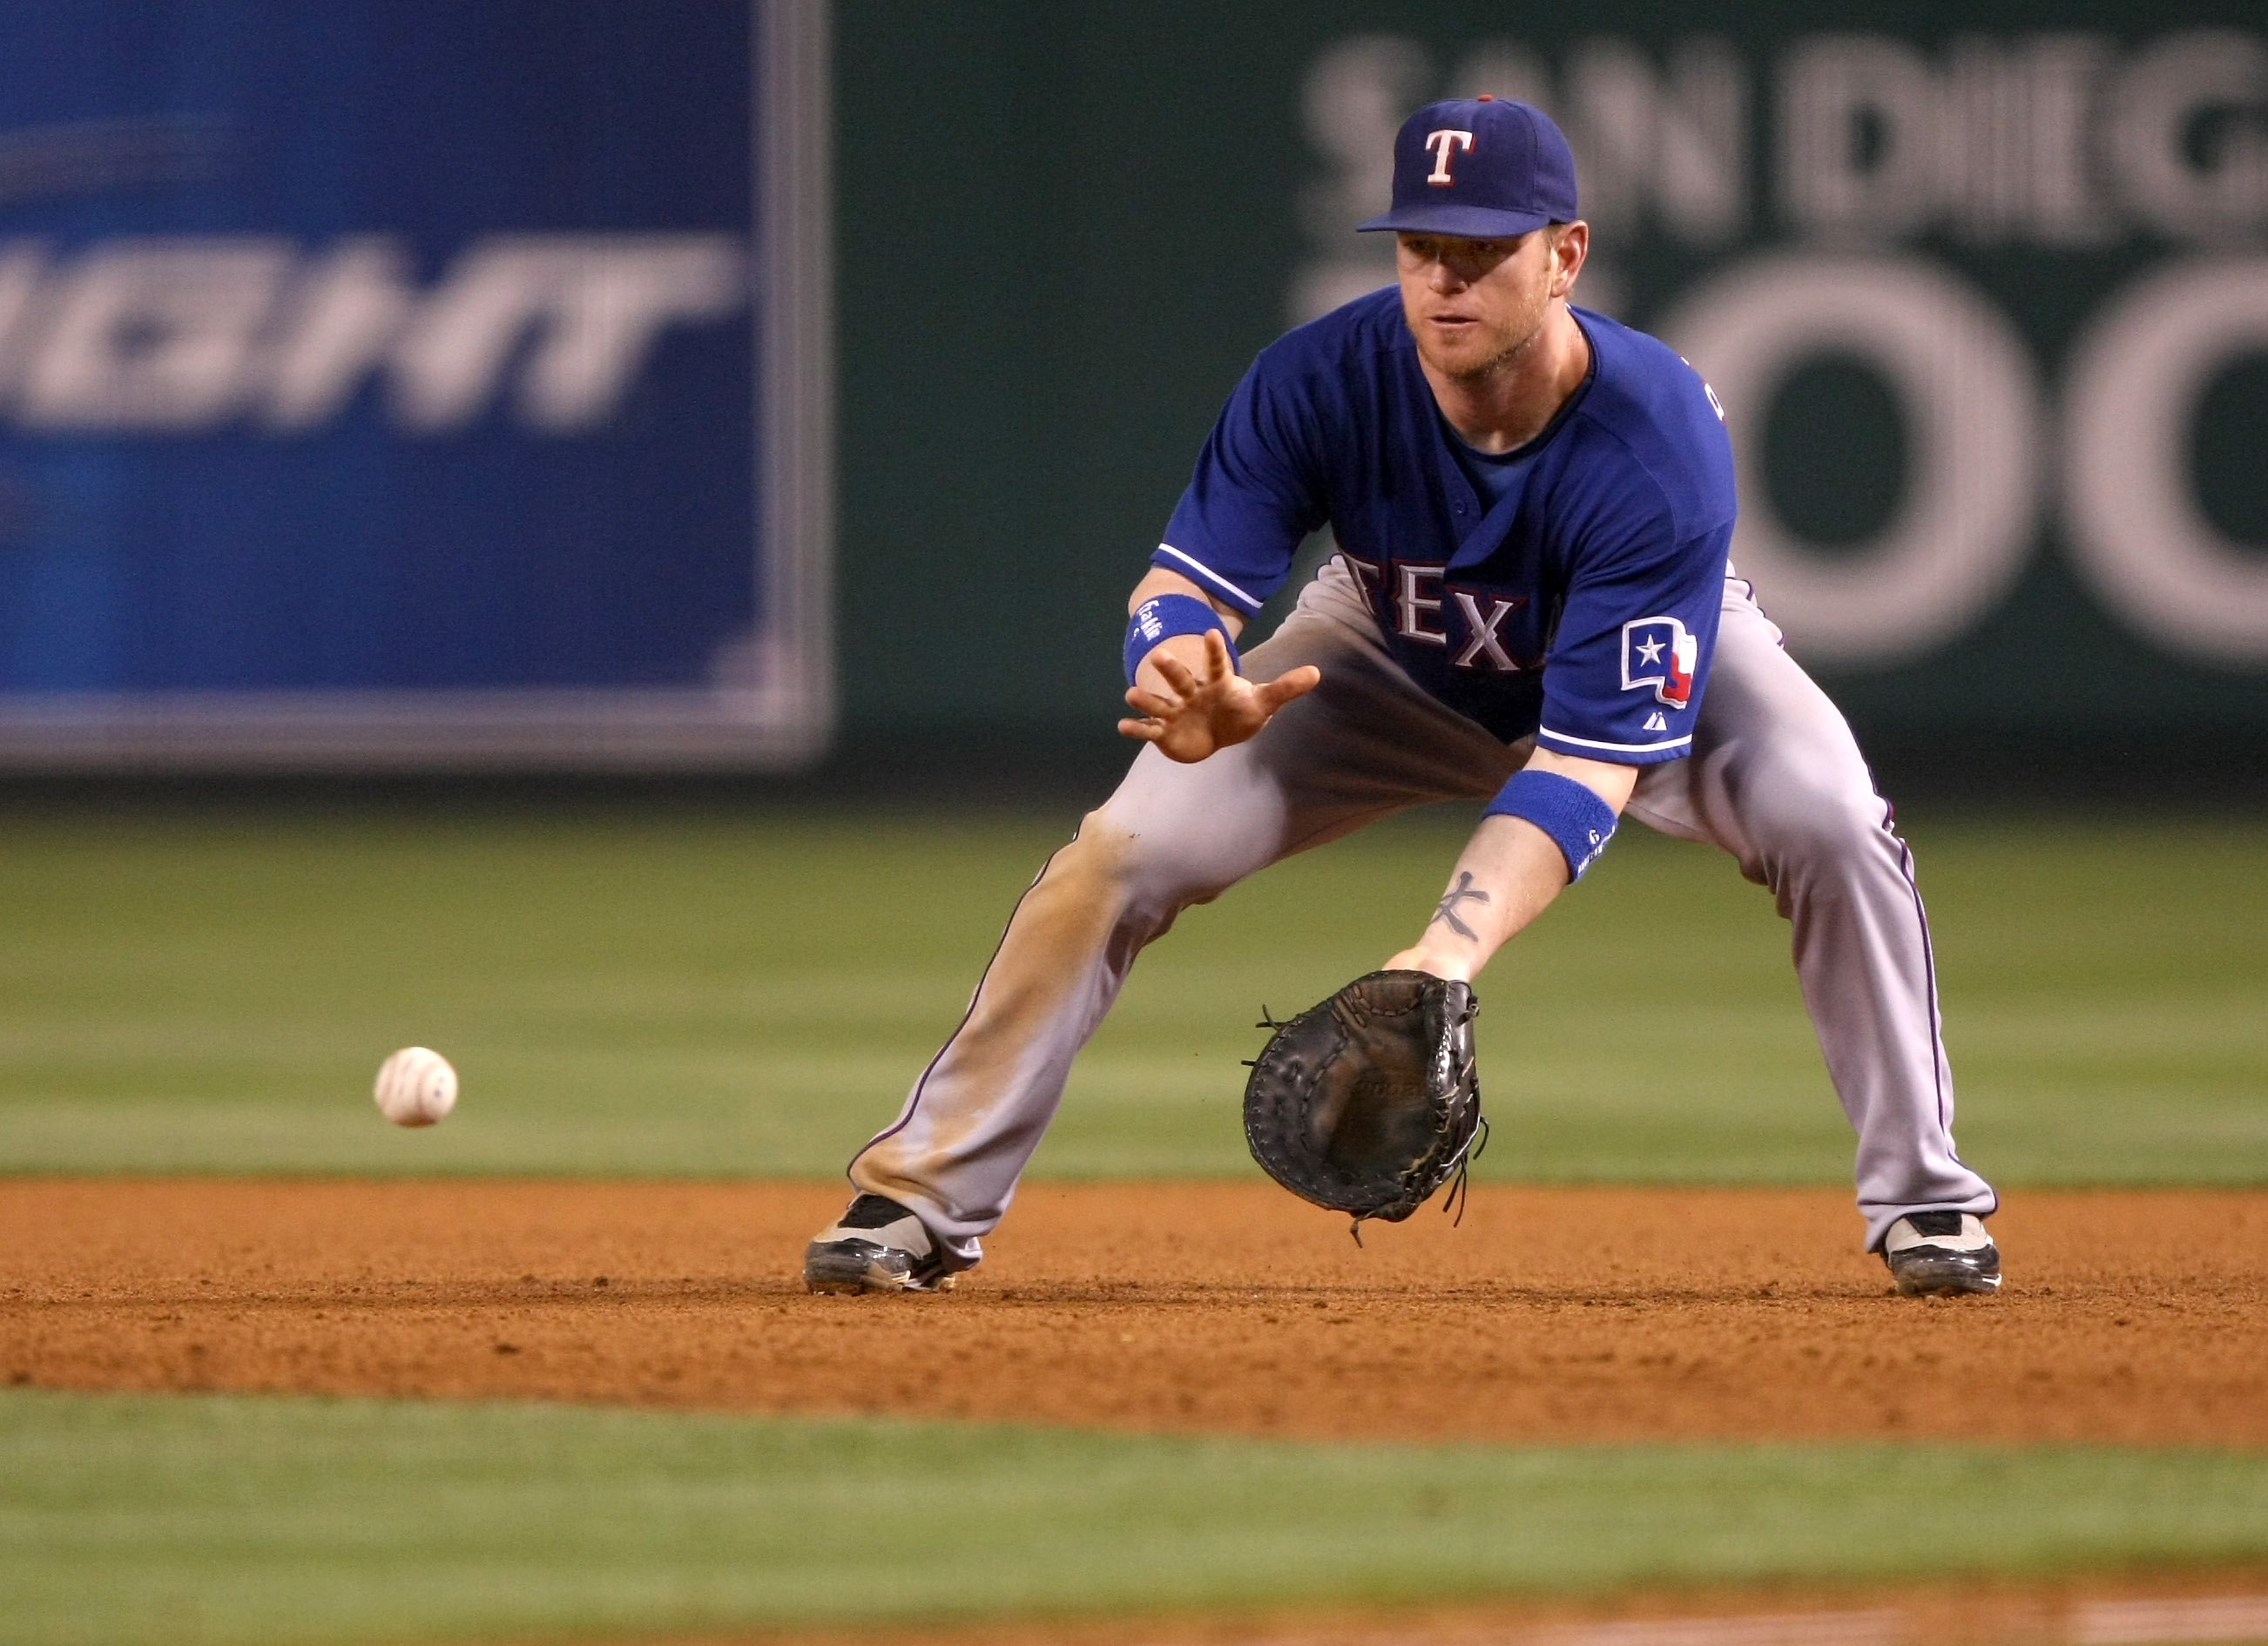 ANAHEIM, CA - JULY 08:  First baseman Hank Blalock #9 of the Texas Rangers fields a ground ball against the Los Angeles Angels of Anaheim on July 8, 2009 at Angel Stadium in Anaheim, California.  The Rangers won 8-1.  (Photo by Stephen Dunn/Getty Images)